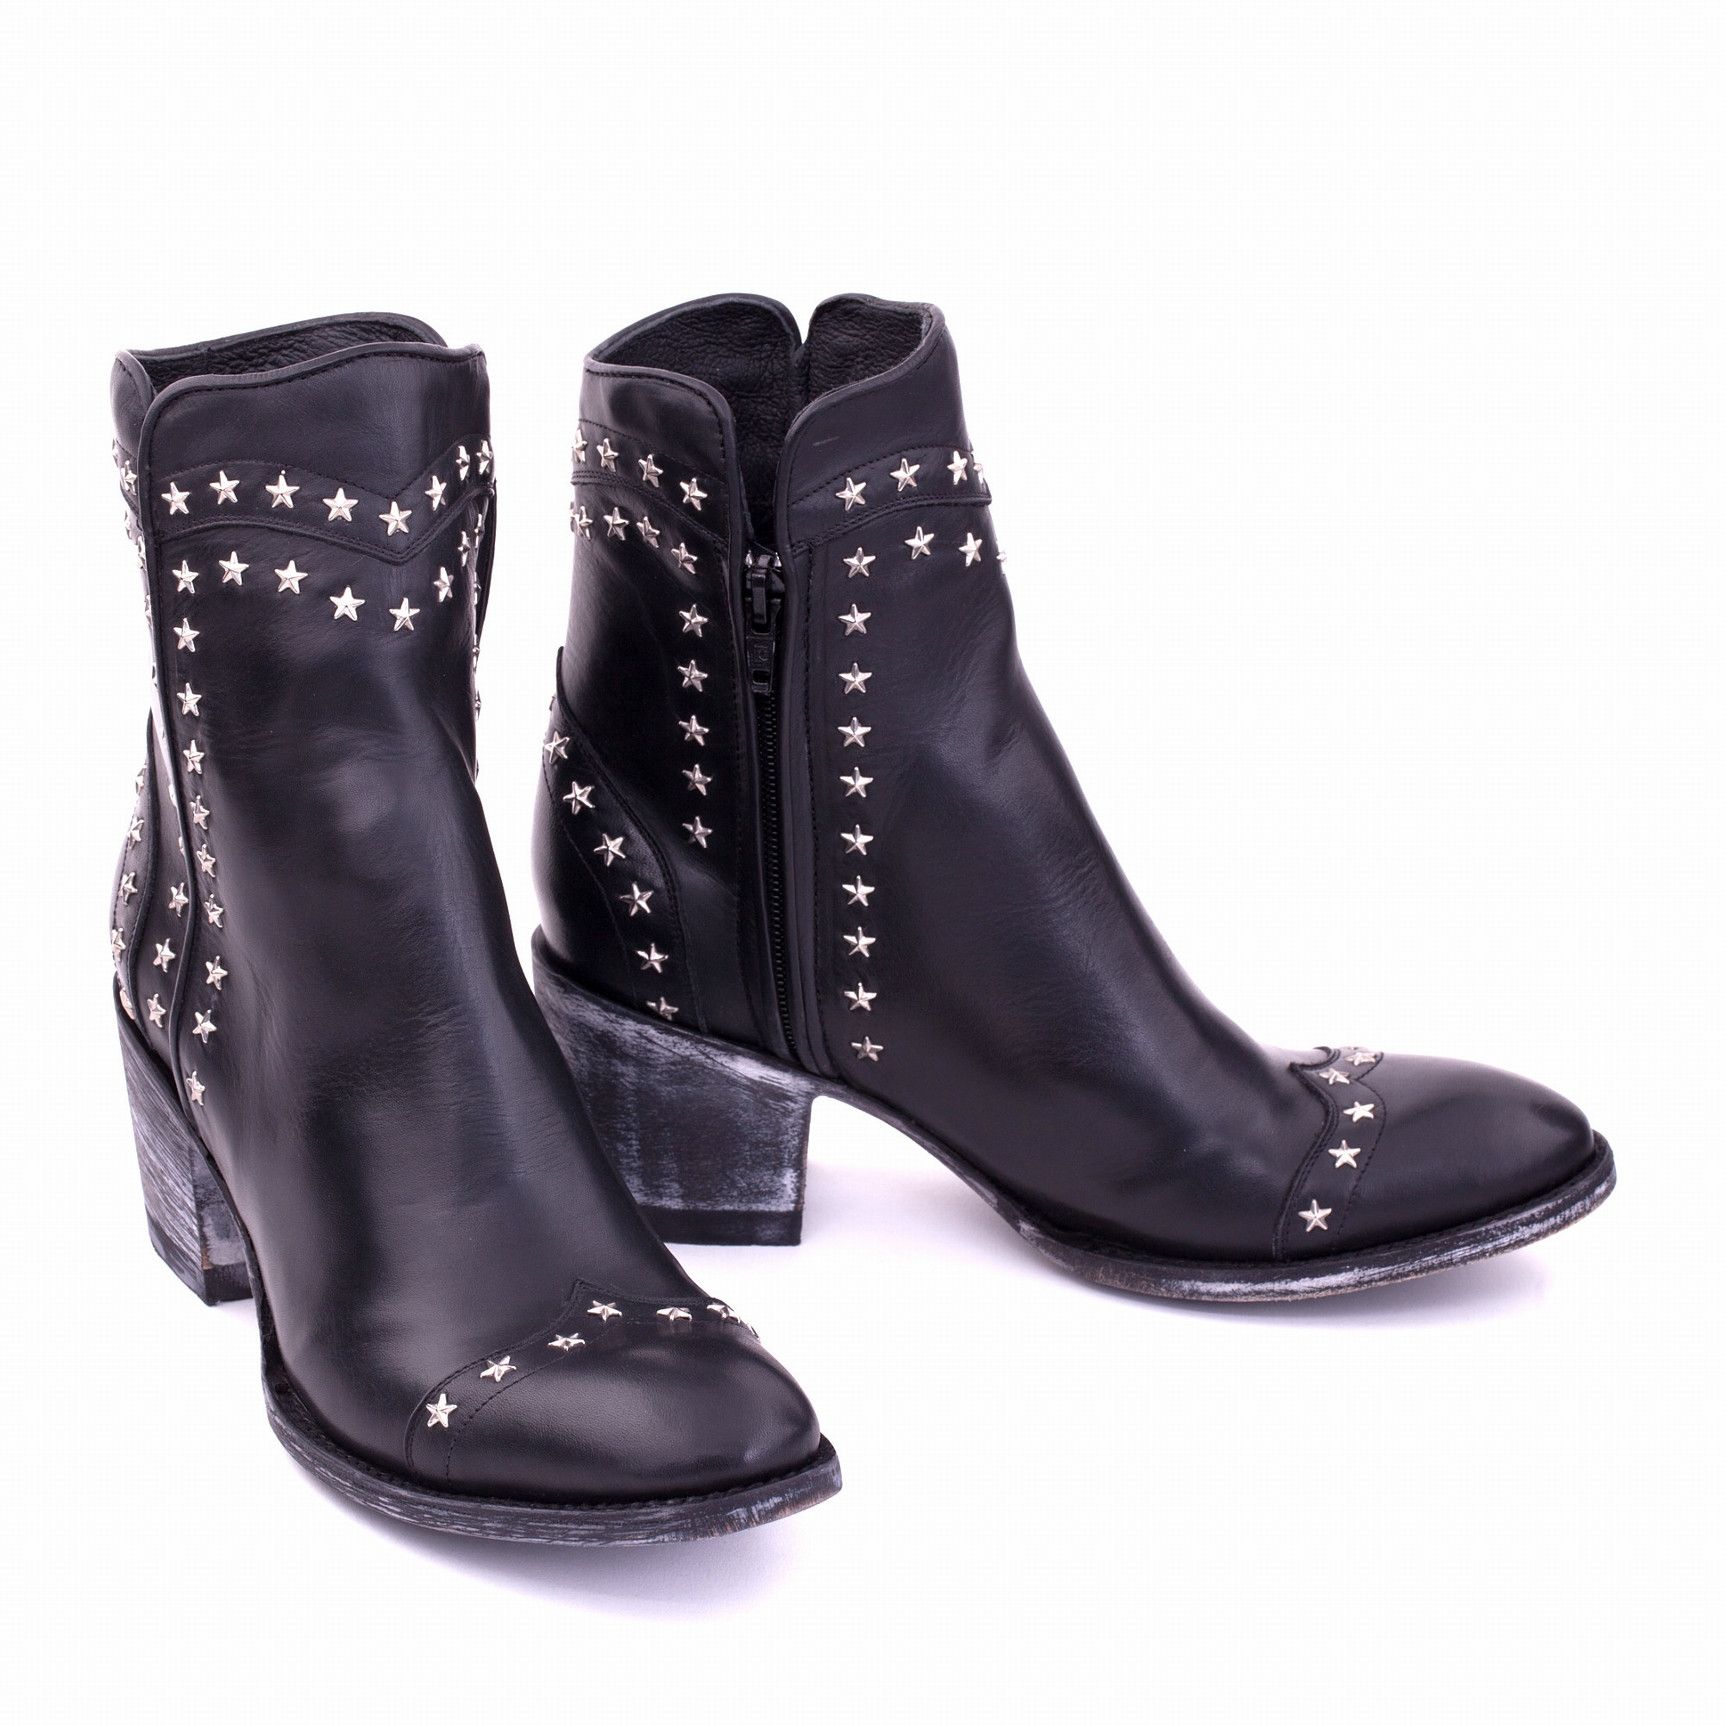 CRITHIER STAR BLACK RANCHERO ROUNDED ANKLE BOOTS WITH STUDS AND  SIDE ZIP CLOSURE  Total heel height 2.6 Inches  100% cow leathe